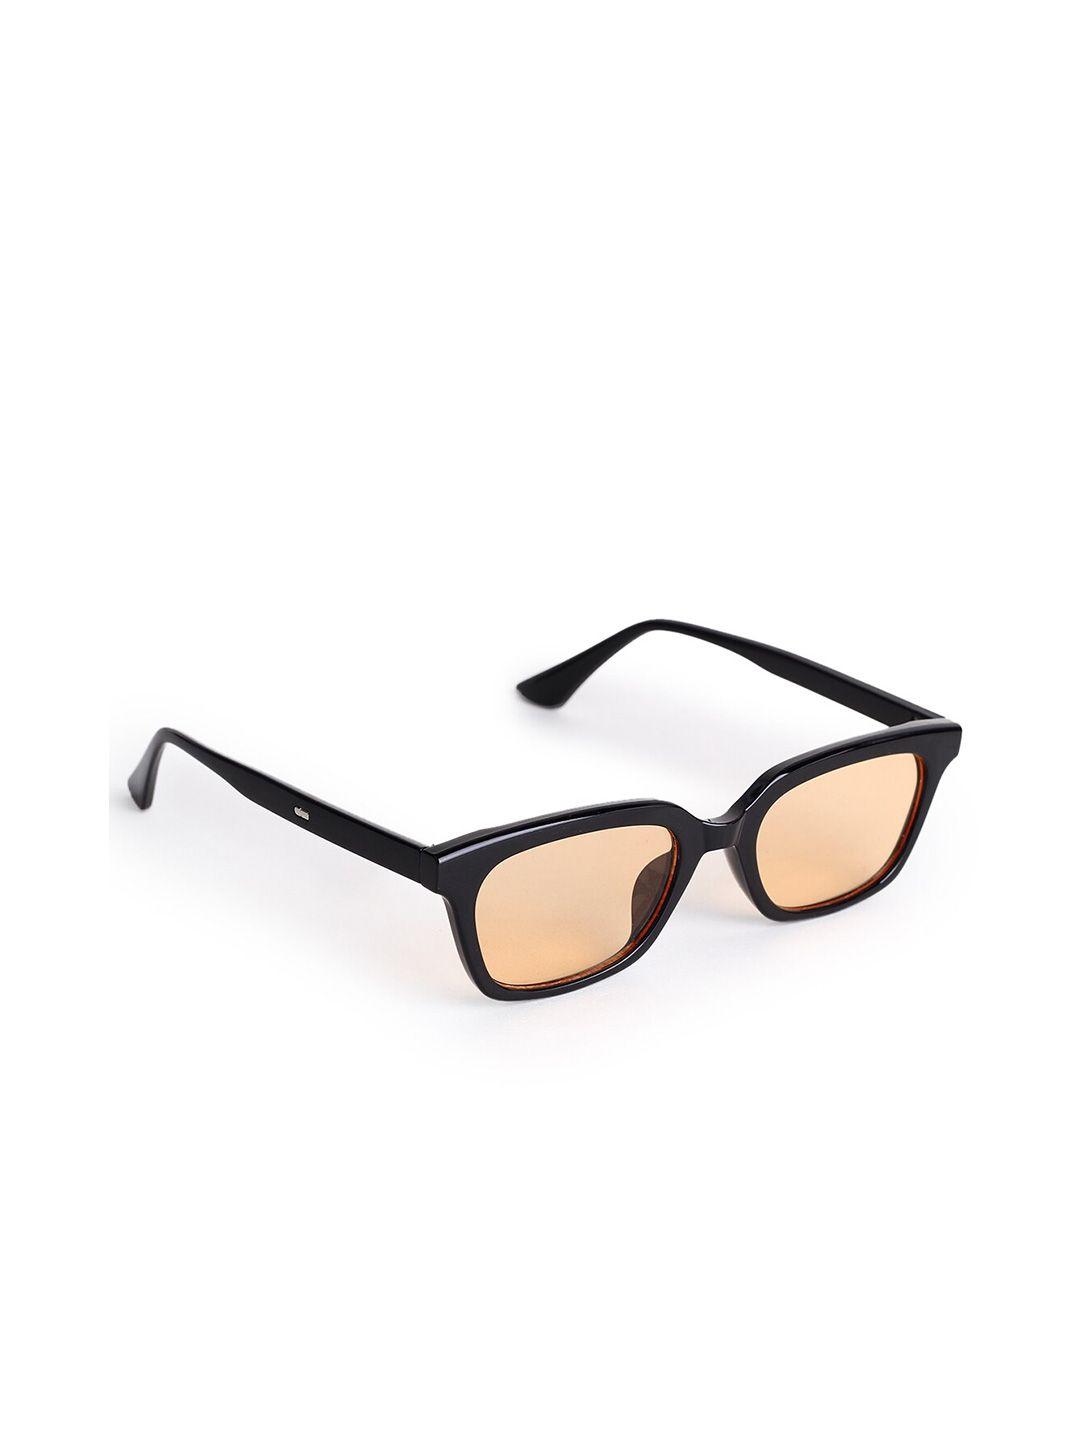 hashburys unisex brown lens & black oval sunglasses with uv protected lens